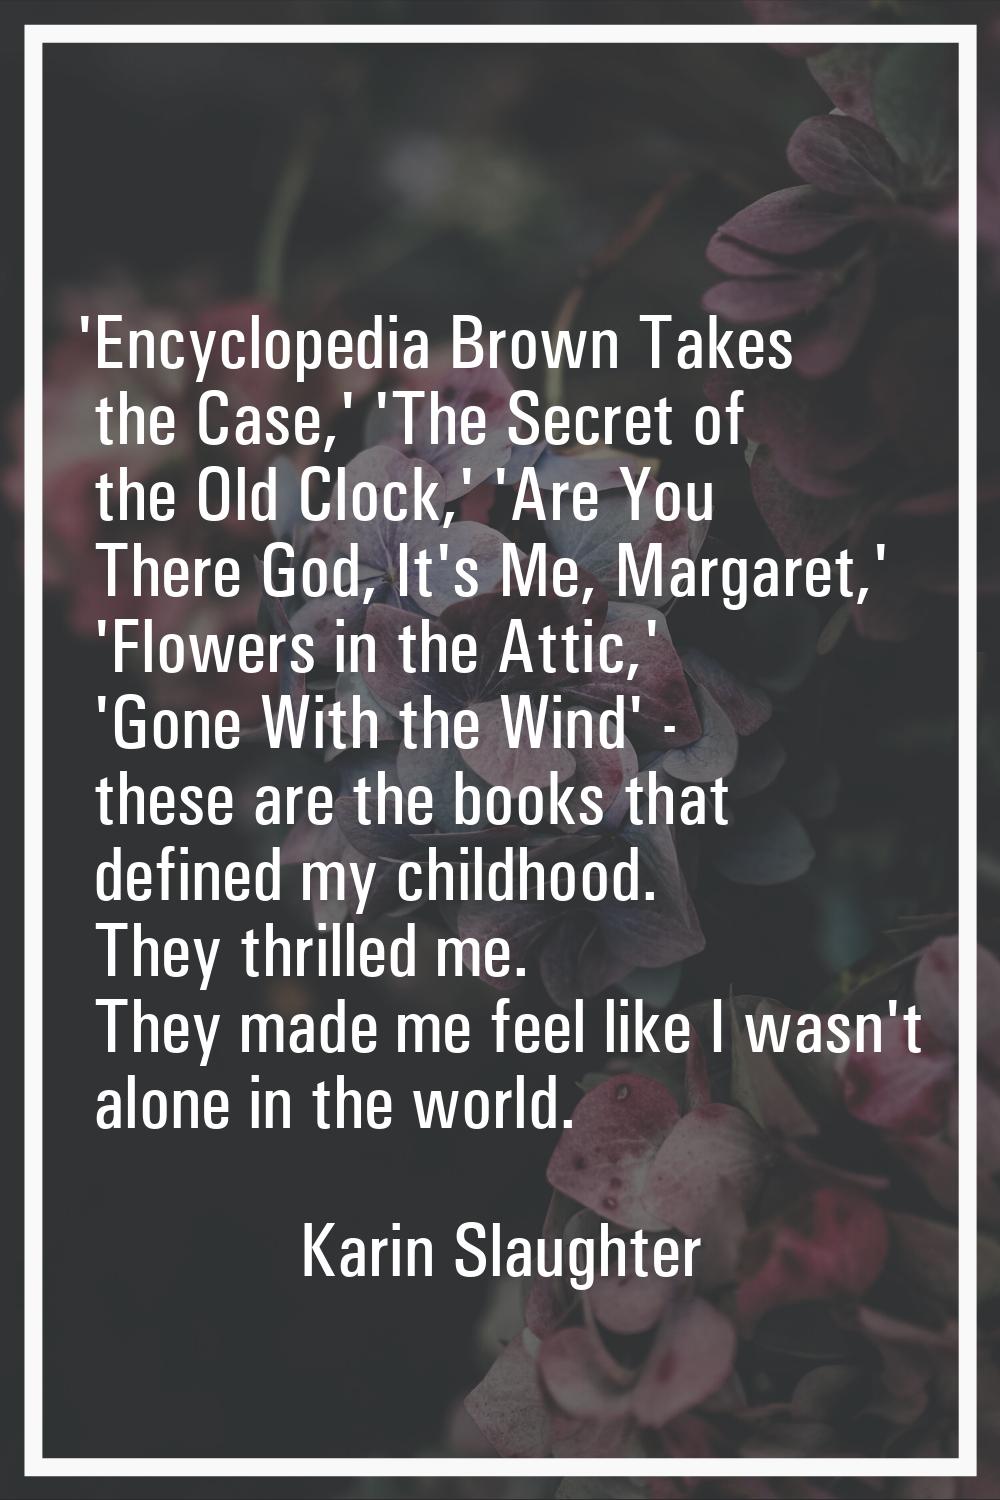 'Encyclopedia Brown Takes the Case,' 'The Secret of the Old Clock,' 'Are You There God, It's Me, Ma